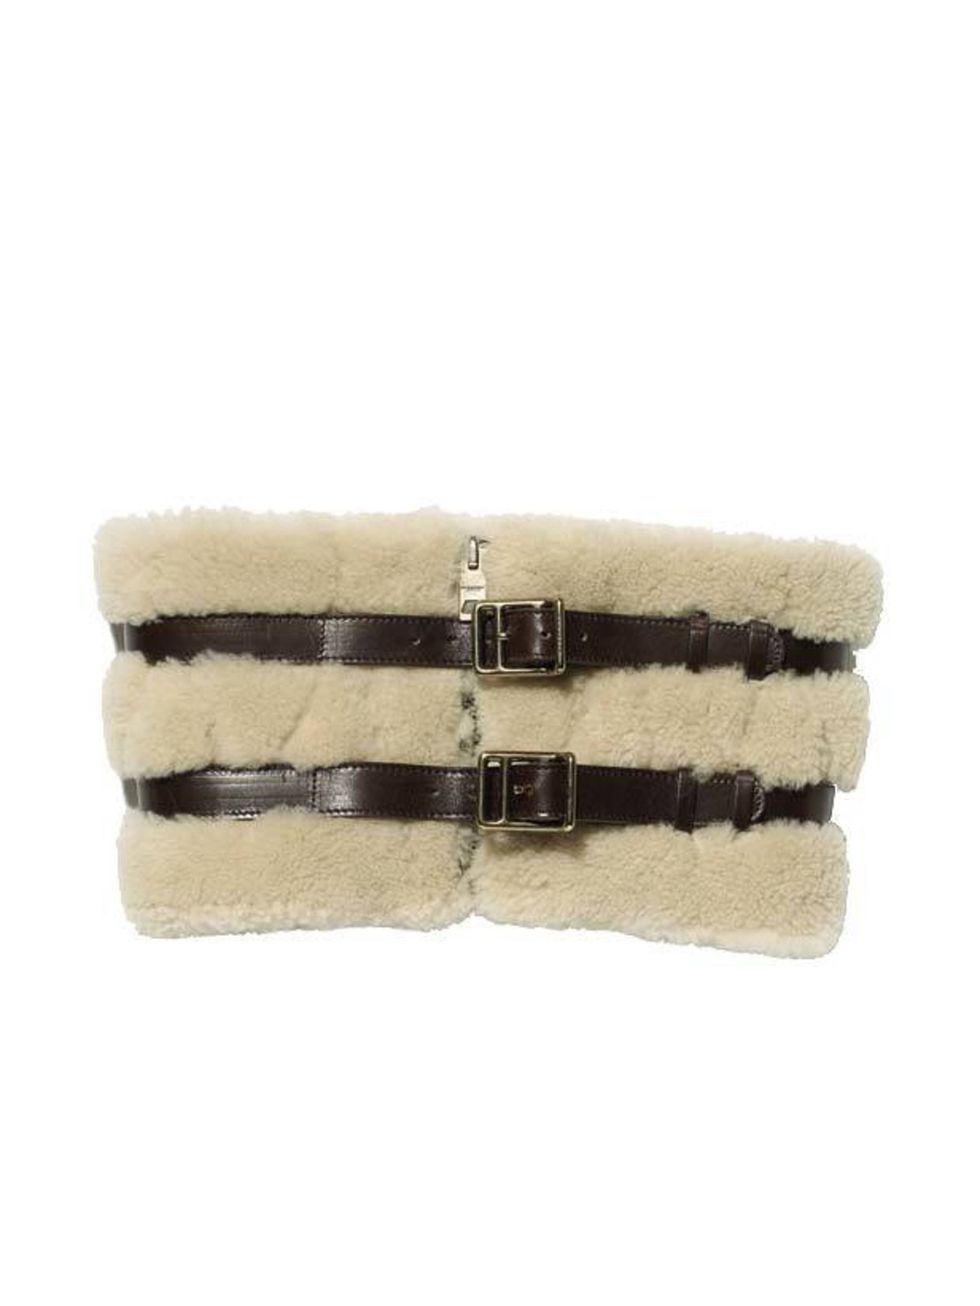 <p><a href="http://uk.burberry.com/fcp/product/clothing-accessories/scarves/shearling-snood/10000013173?colour=black&amp;lastcategoryurl=true">Burberry</a> shearling snood, £495</p>